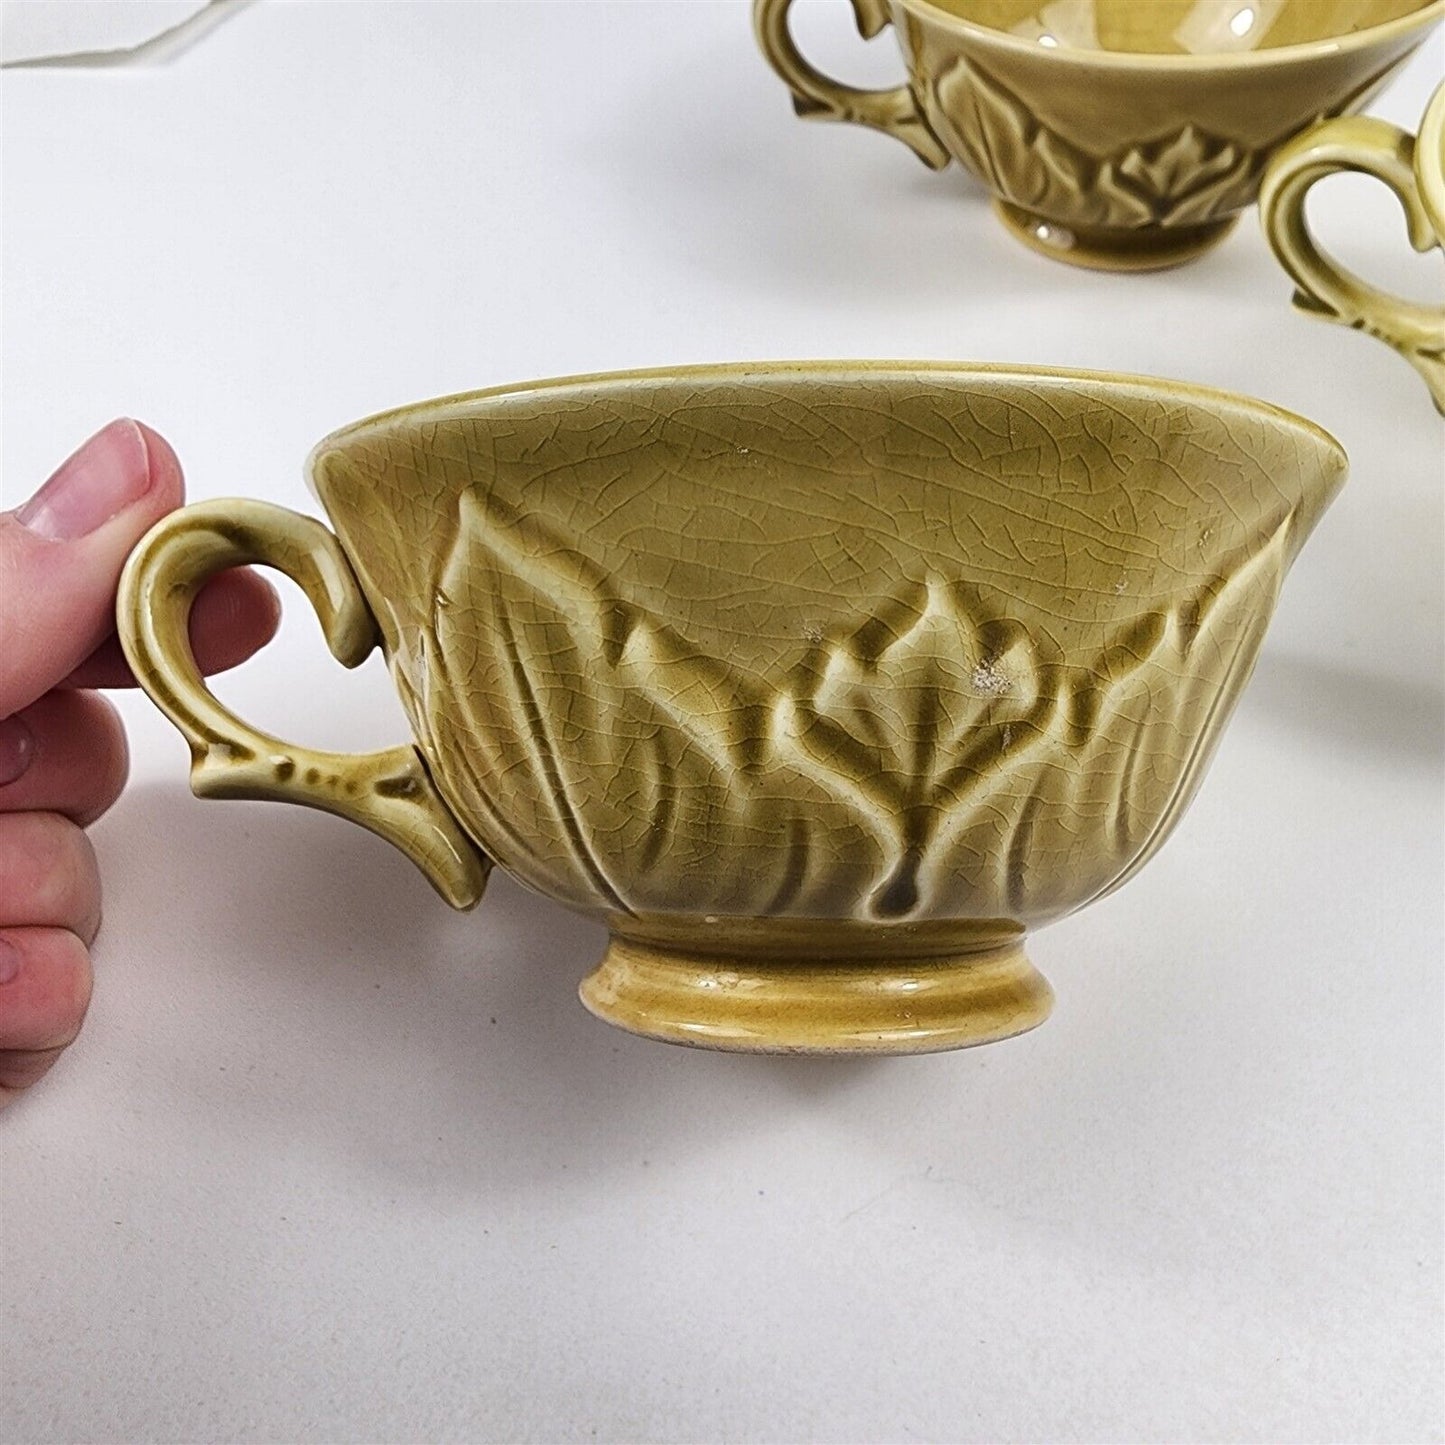 7 Pc Woodfield Steubenville Golden Fawn Green Leaf Snack Tea Set 3 Cups 4 Plates